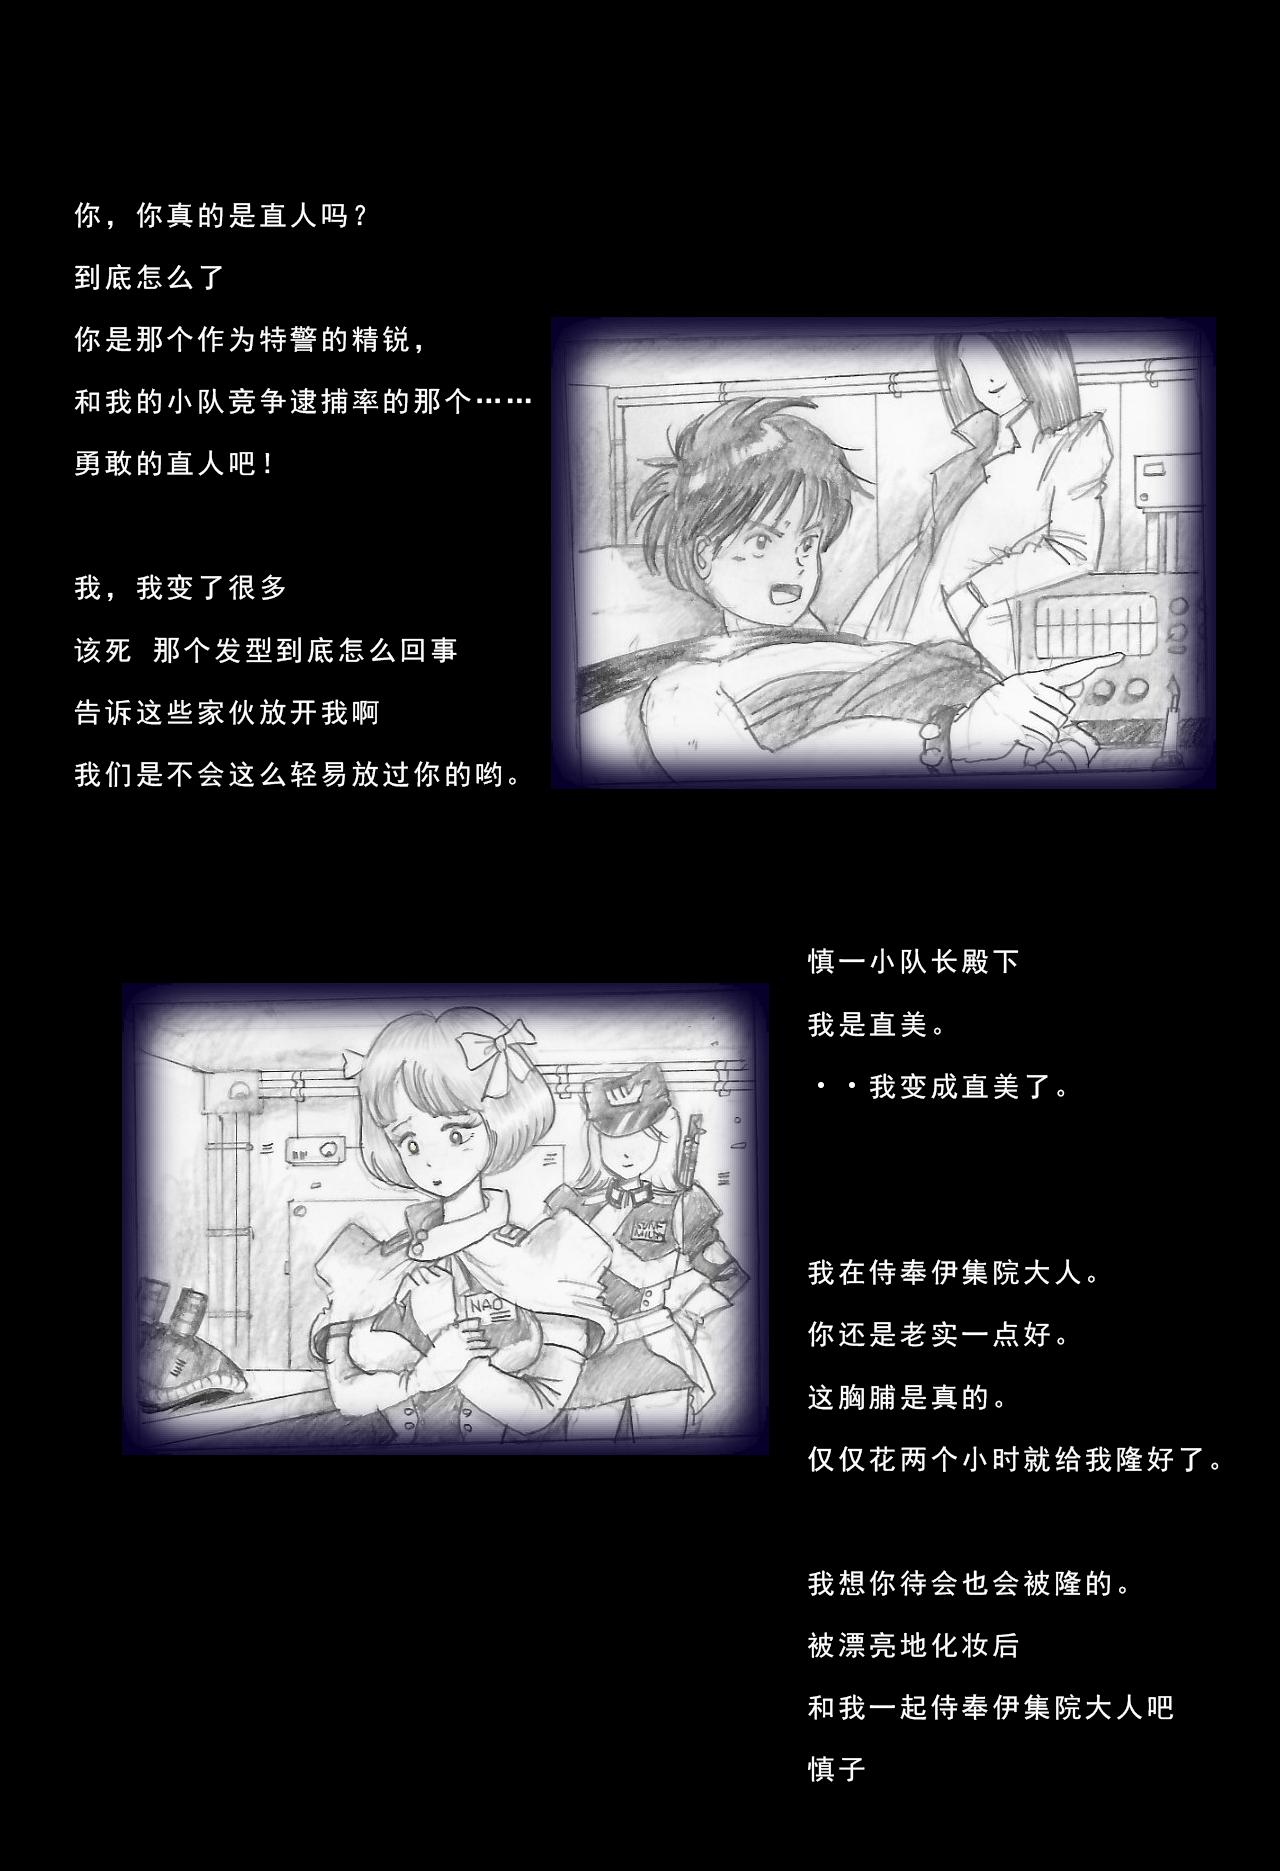 Special Police Third Platoon Captain Abduction Restraint Edition【chinese】 2